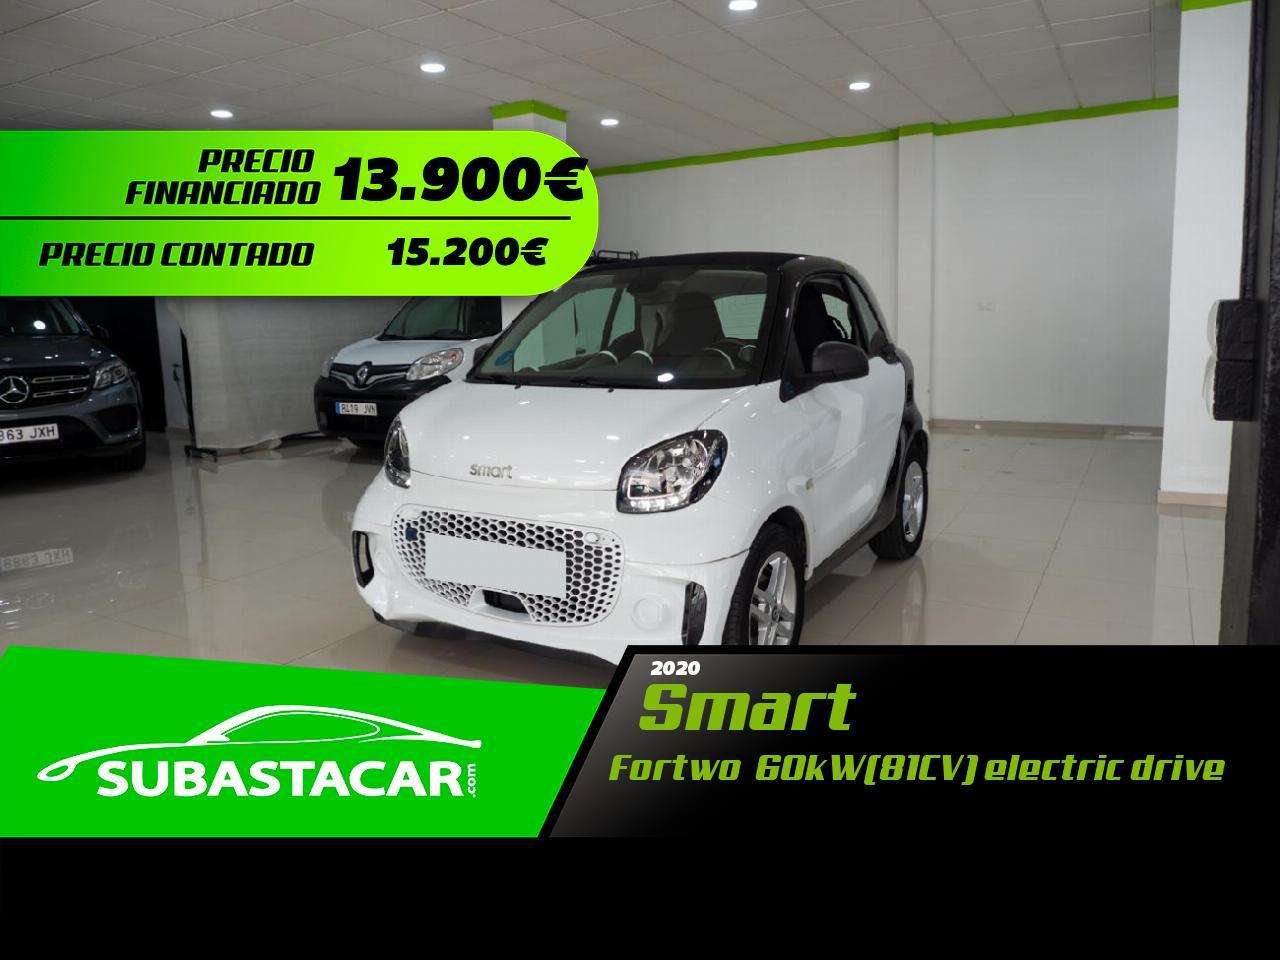 smart forTwo Convertible in White used in SEVILLA for € 13,900.-